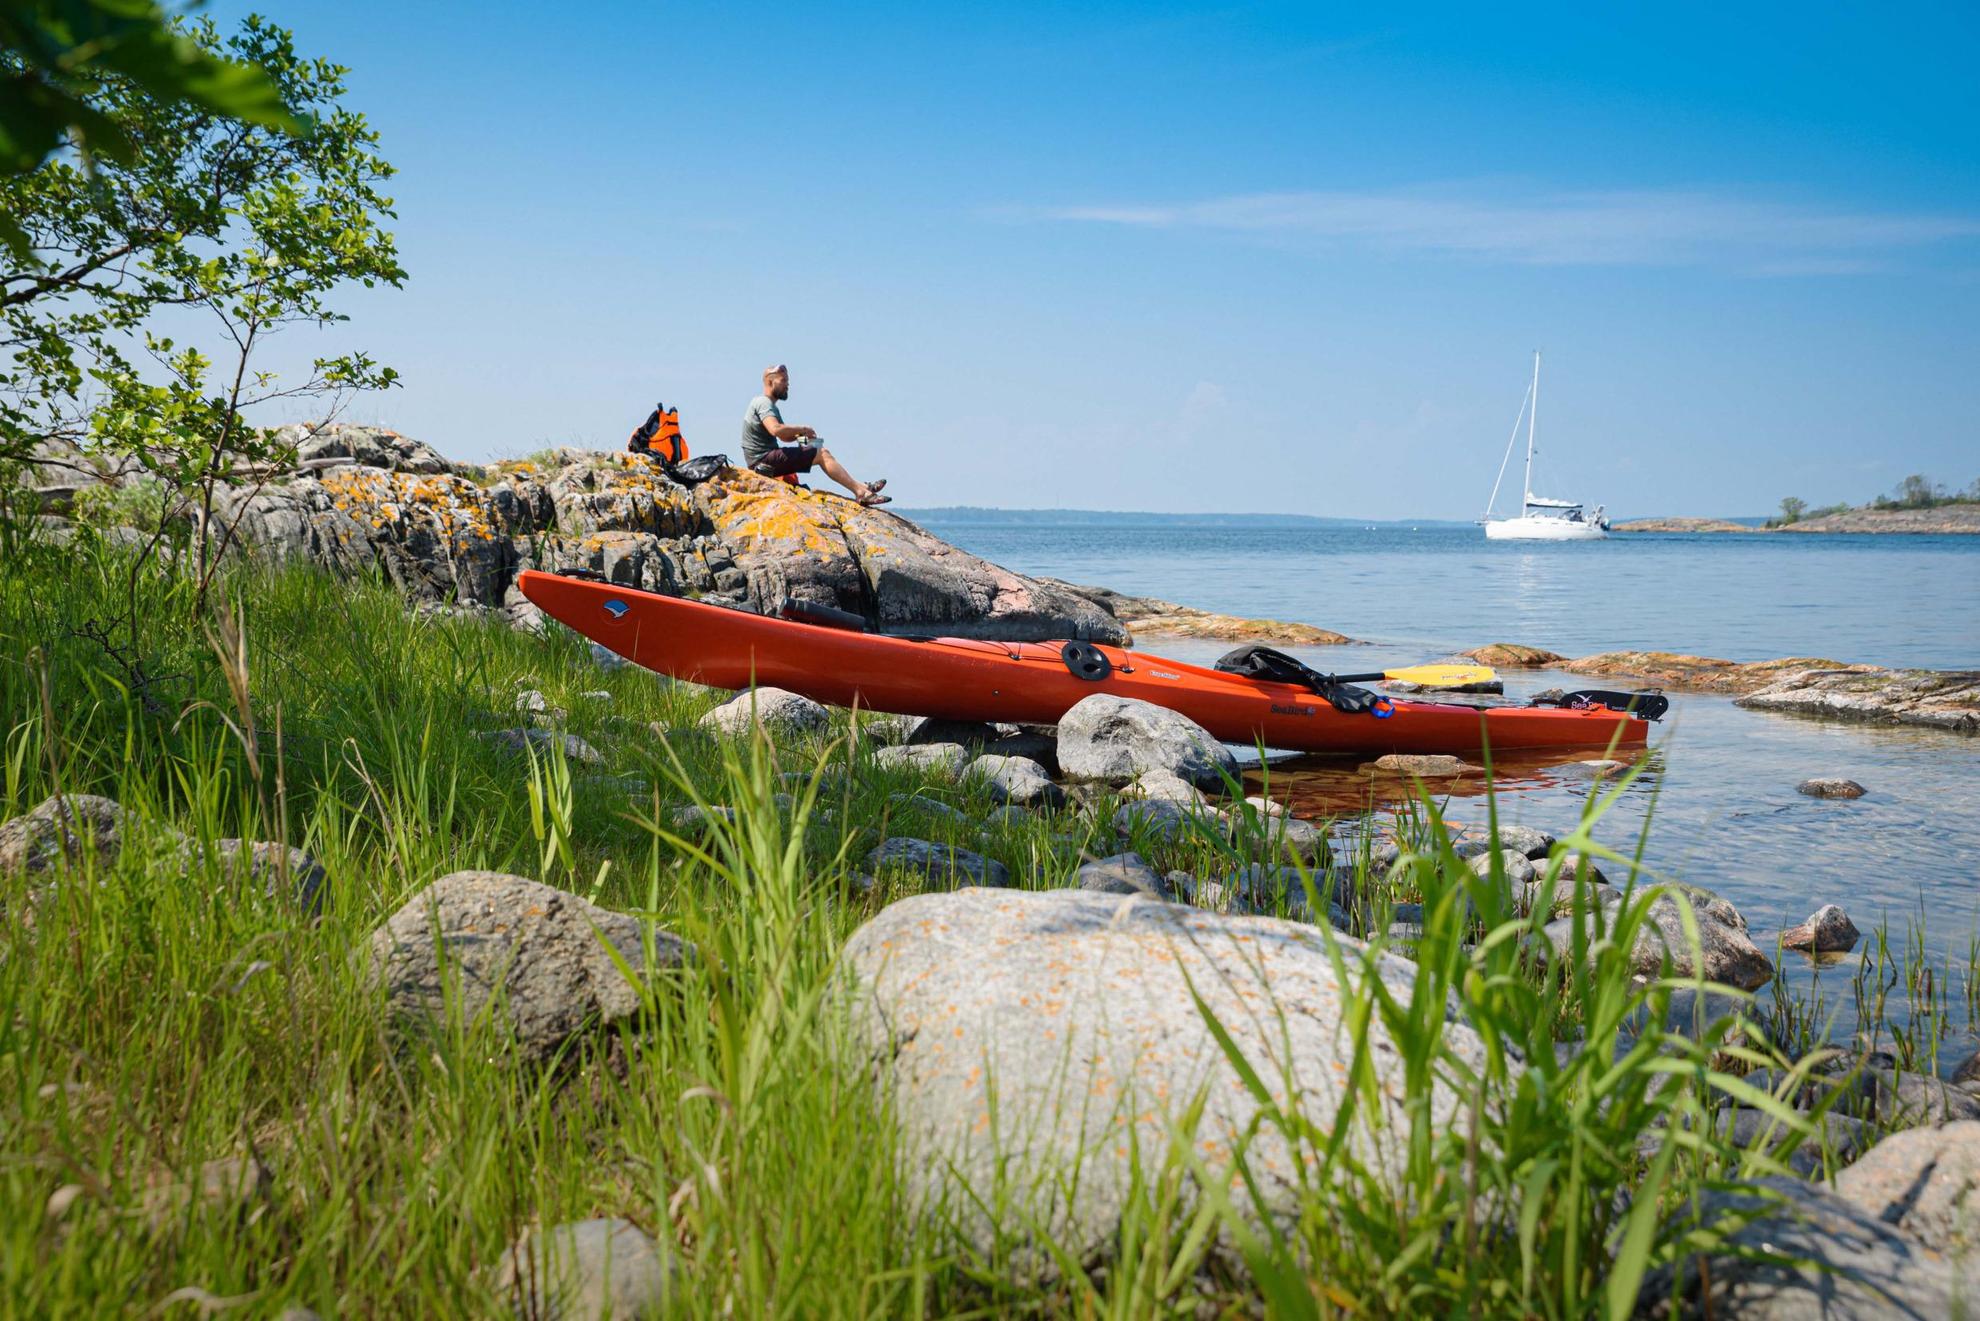 An orange kayak lies on the side of the water while a man enjoys a lunch on the cliffs. A white sailboat is in the background.